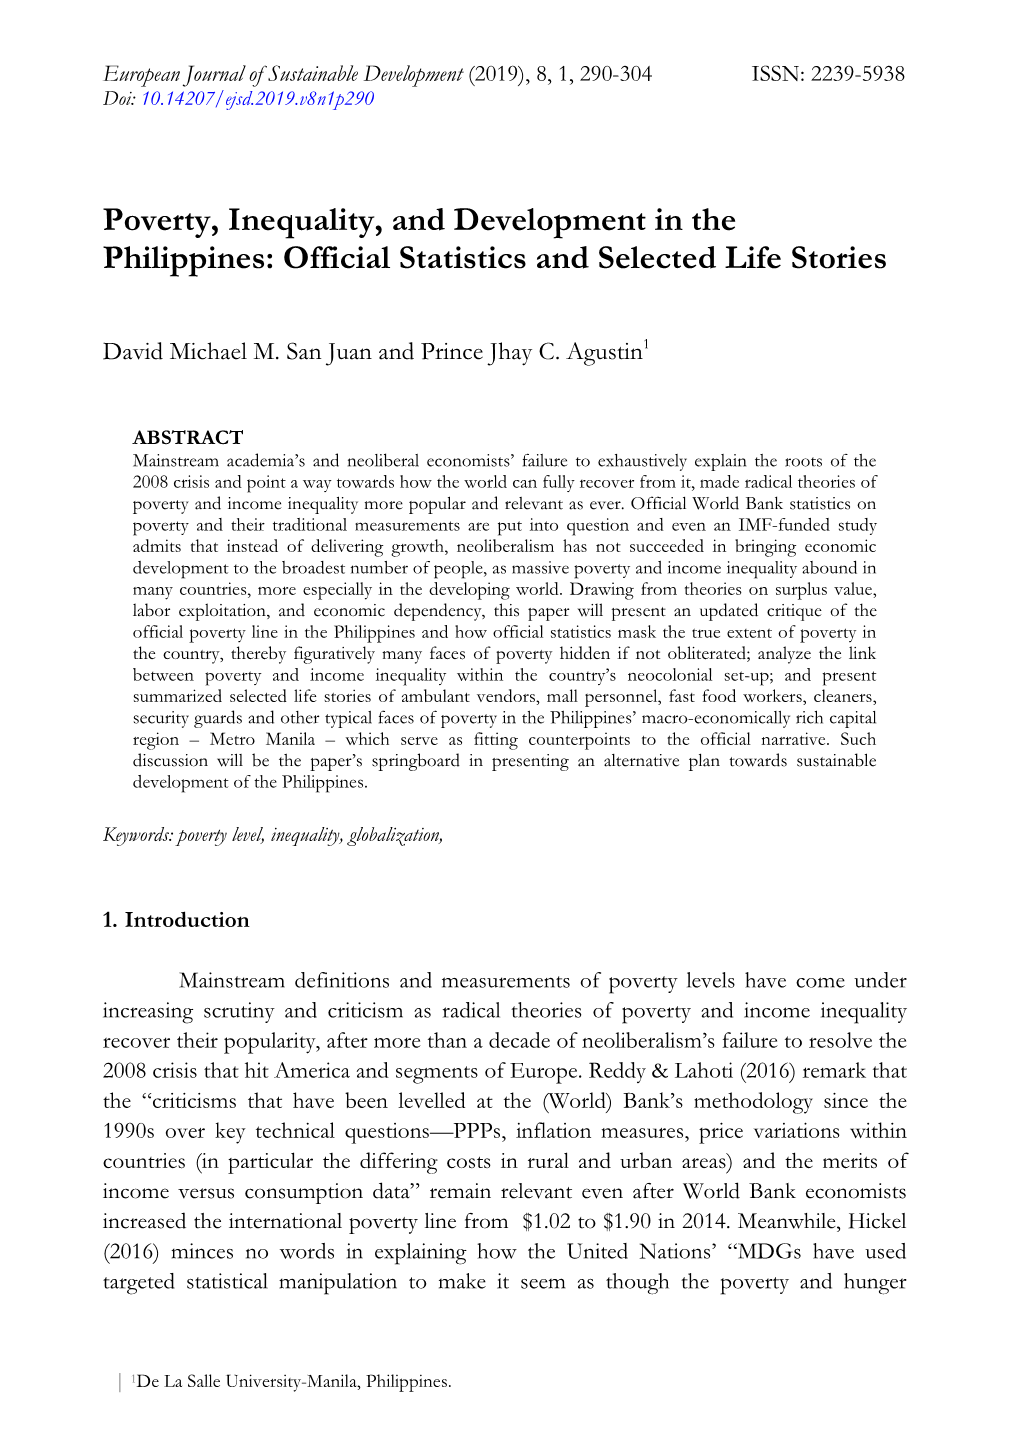 Poverty, Inequality, and Development in the Philippines: Official Statistics and Selected Life Stories